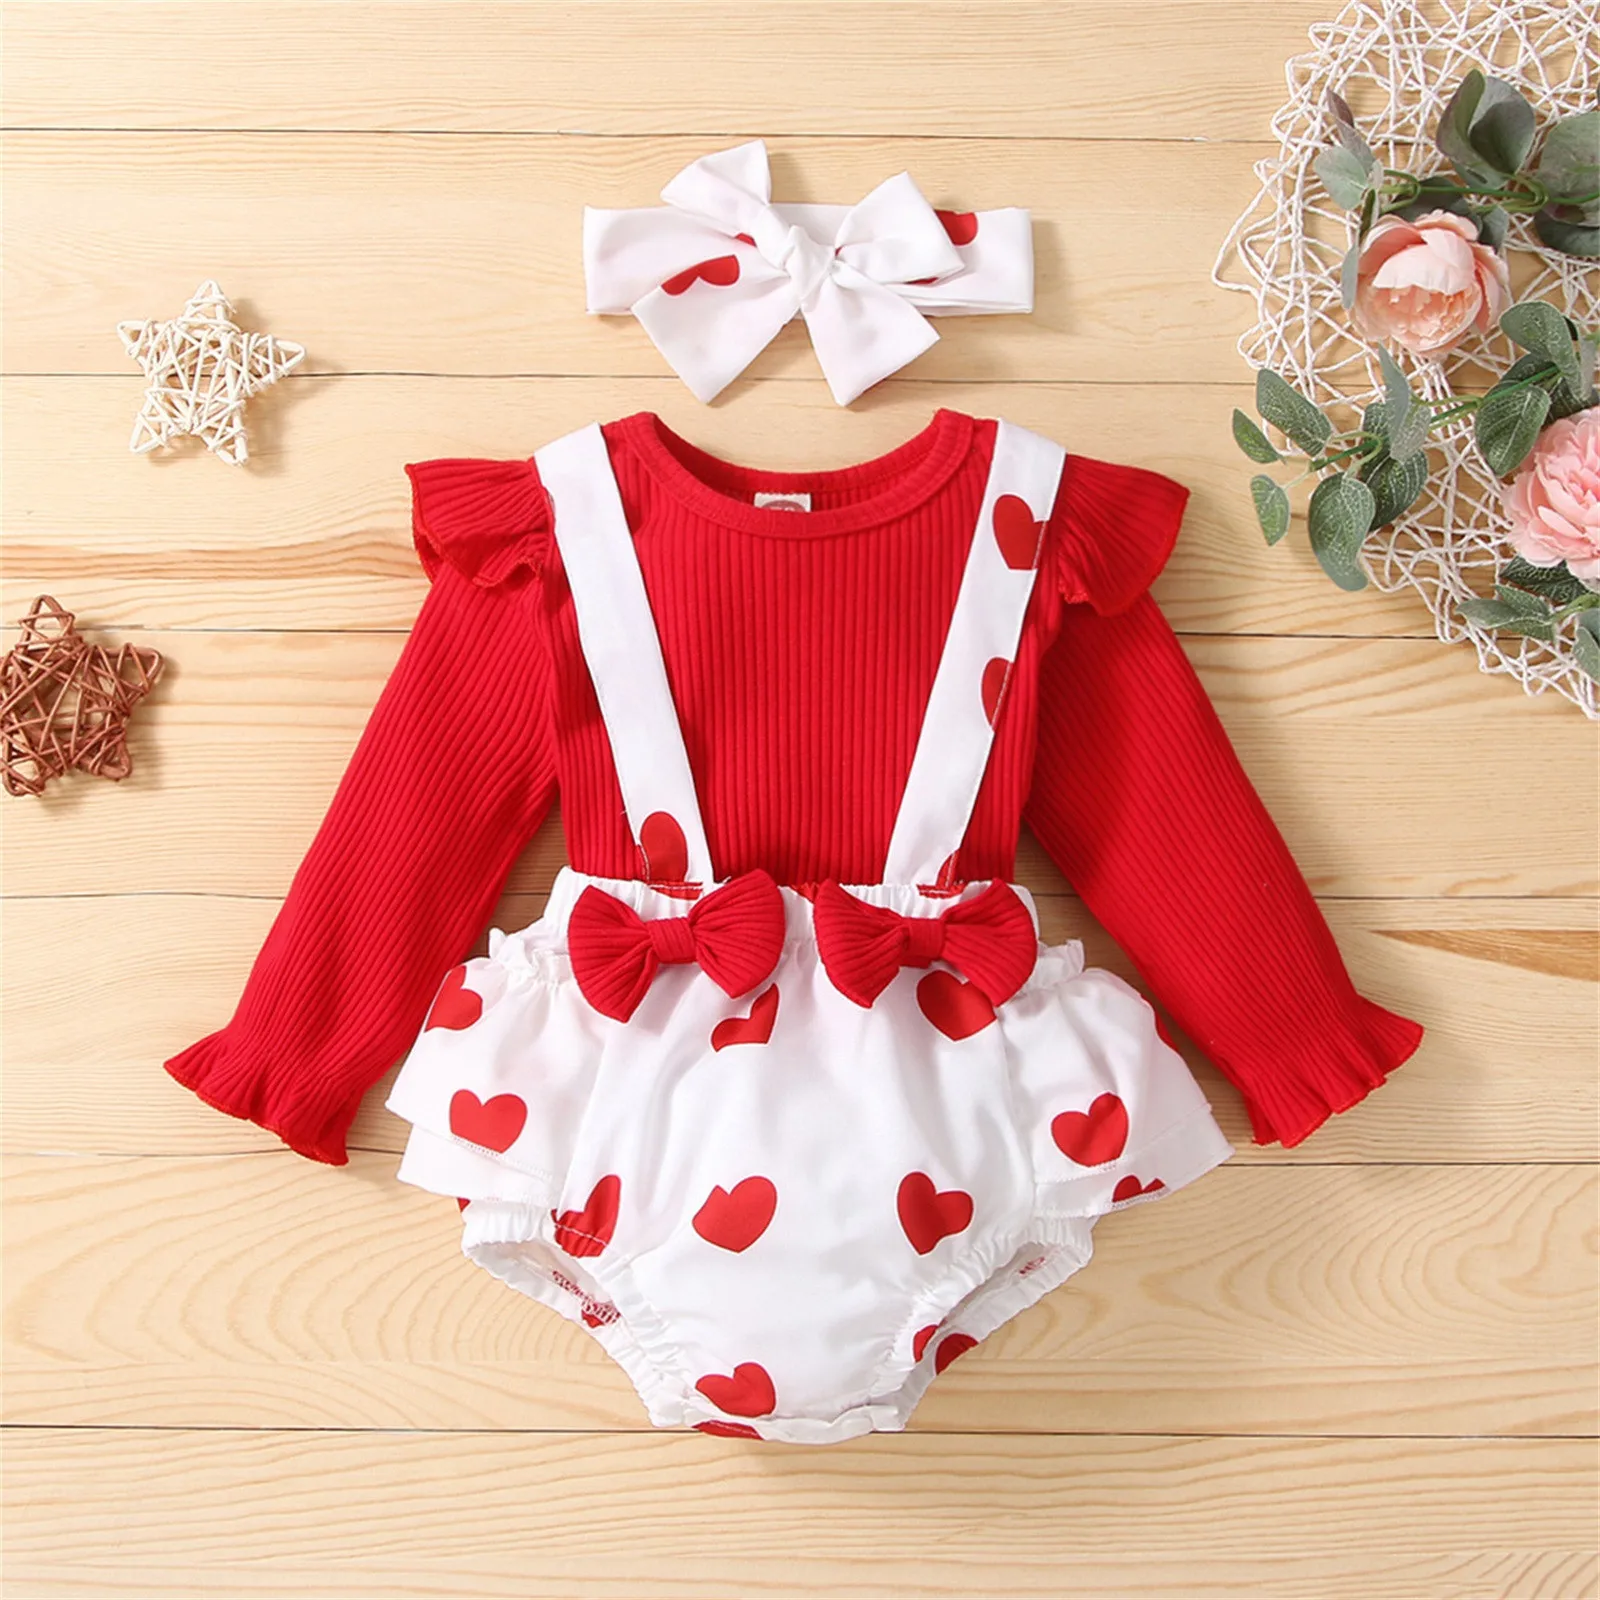 Valentine's Day Newborn Clothes Set Baby Girls Red Ruffle Long Sleeve Knit Ribbed T-shirt Suspender Shorts Headband 3Pcs Outfit